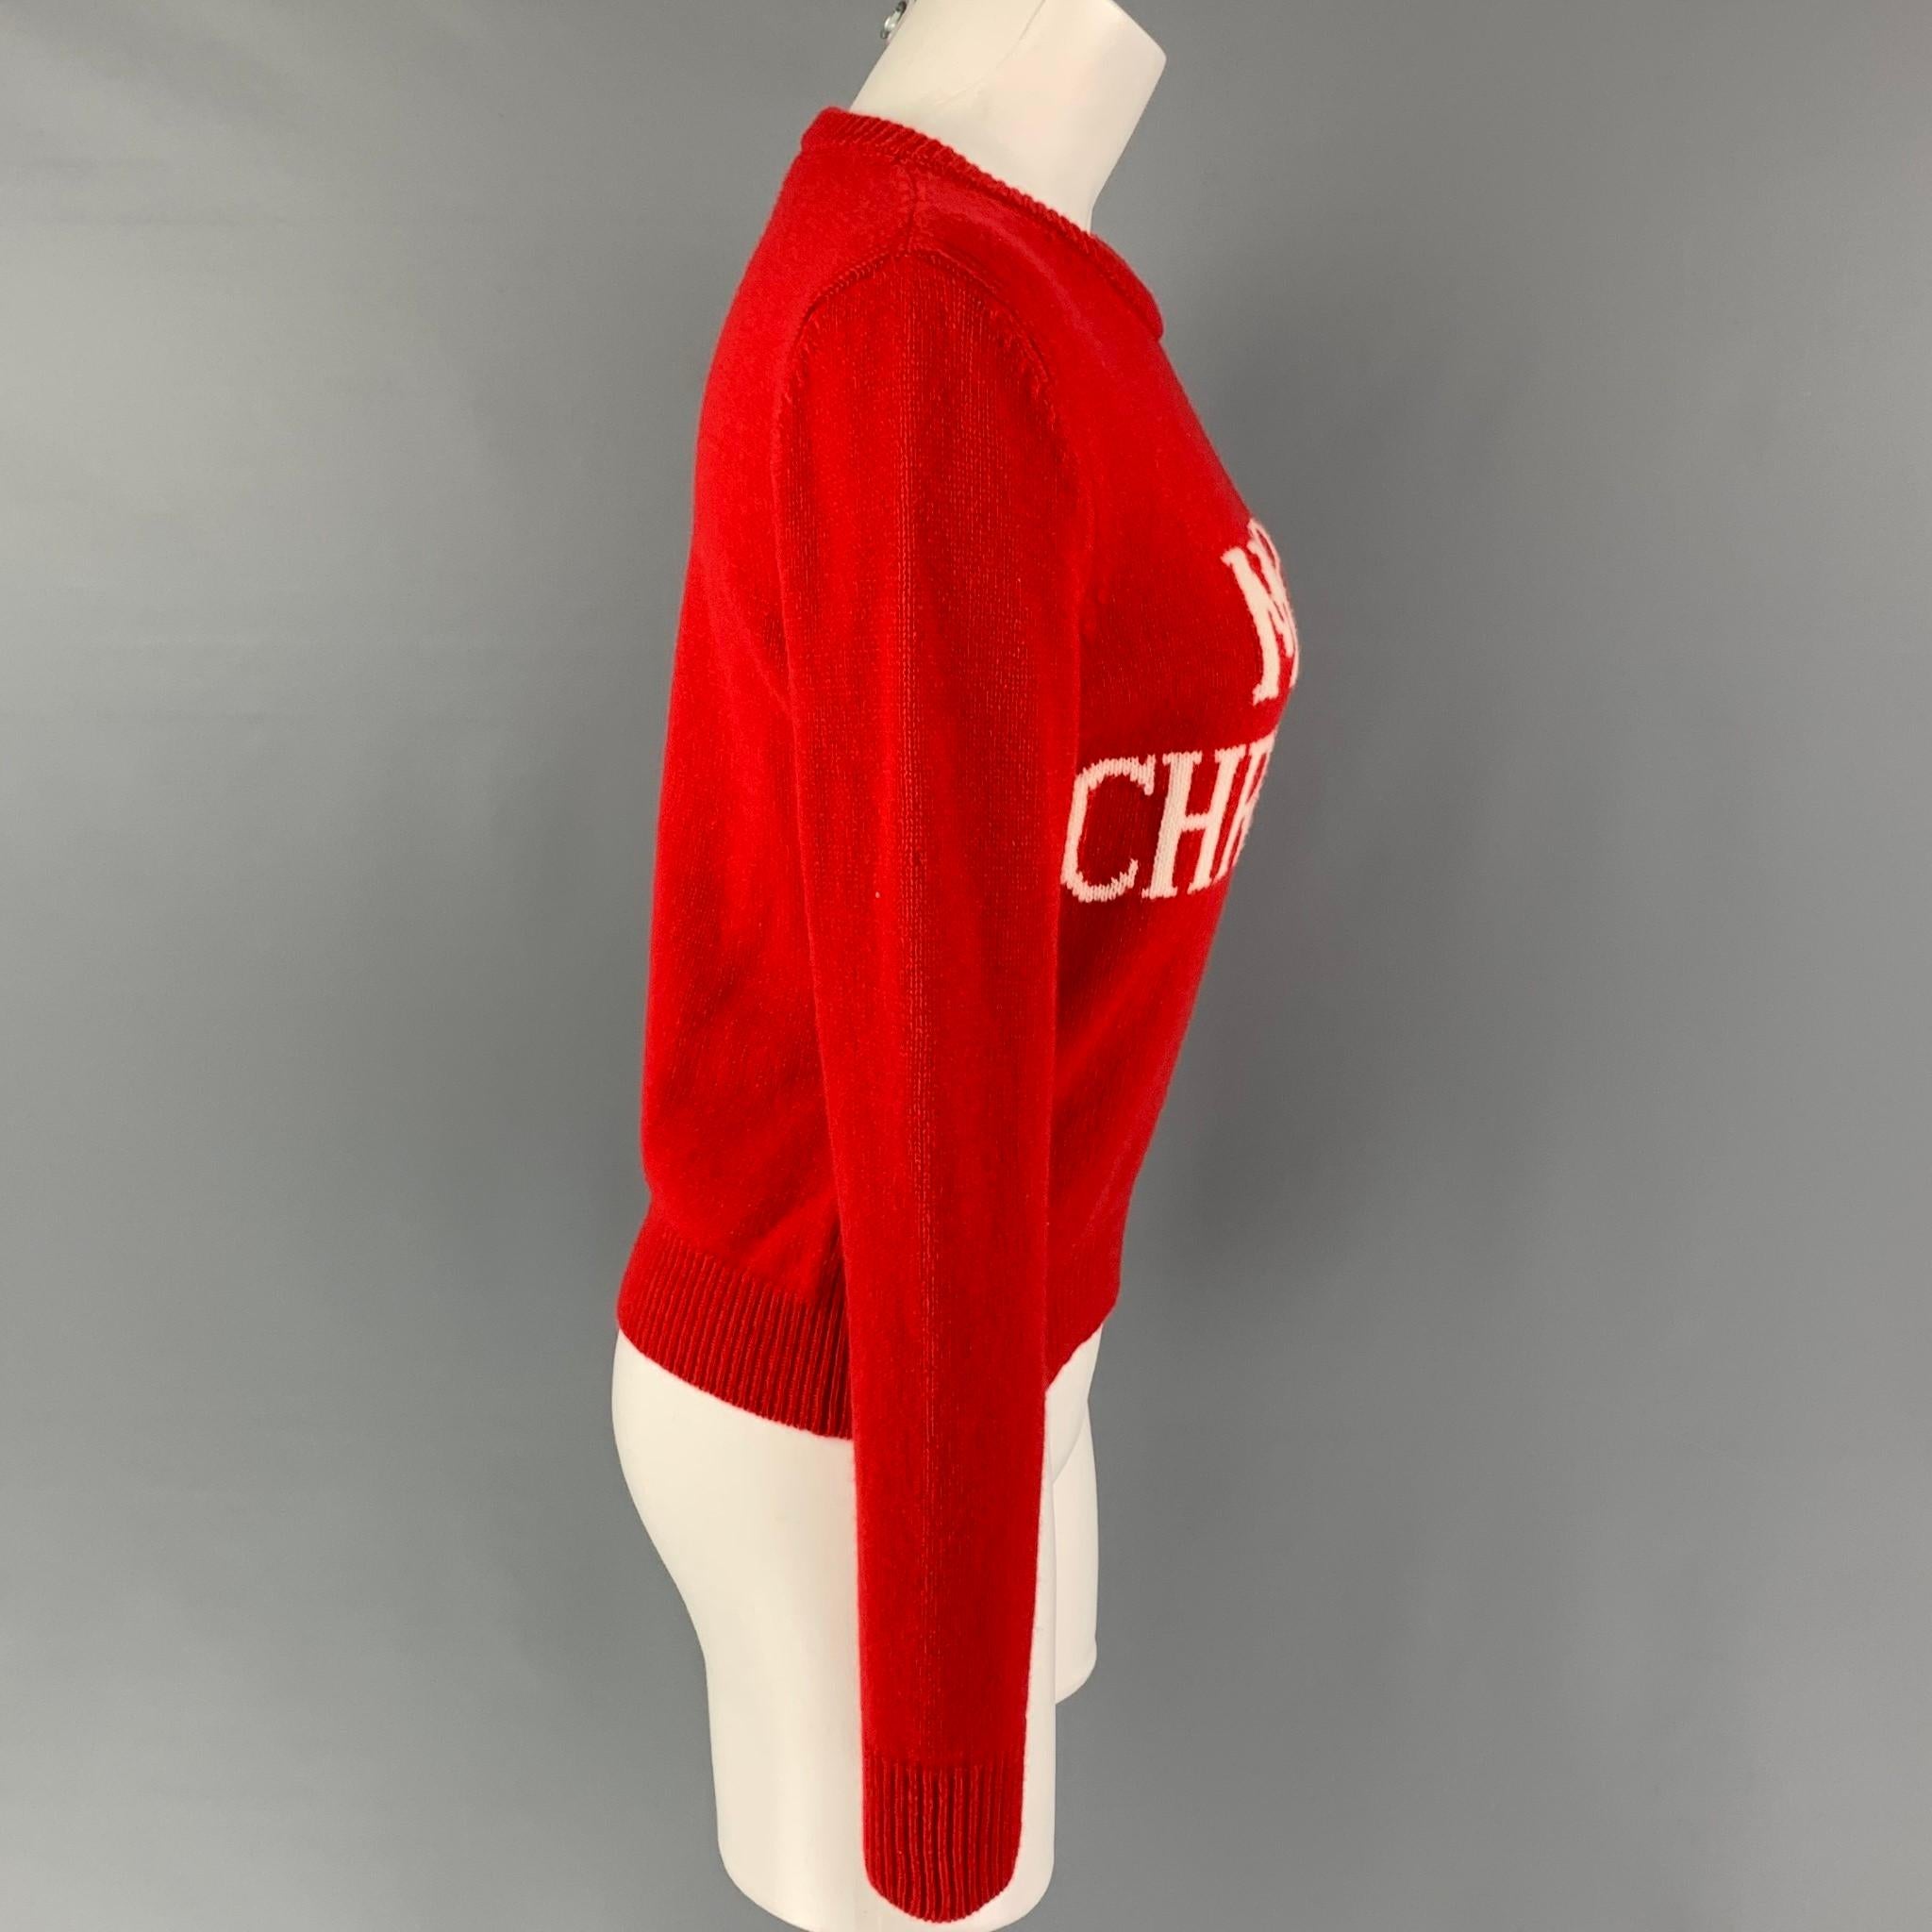 ALBERTA FERRETTI sweater comes in a red virgin wool featuring a white front 'Merry Christmas' design and a crew-neck. Made in Italy.

Very Good Pre-Owned Condition.
Marked: I 40 / F 36 / D 36 / GB 8 / 
Original Retail Price: